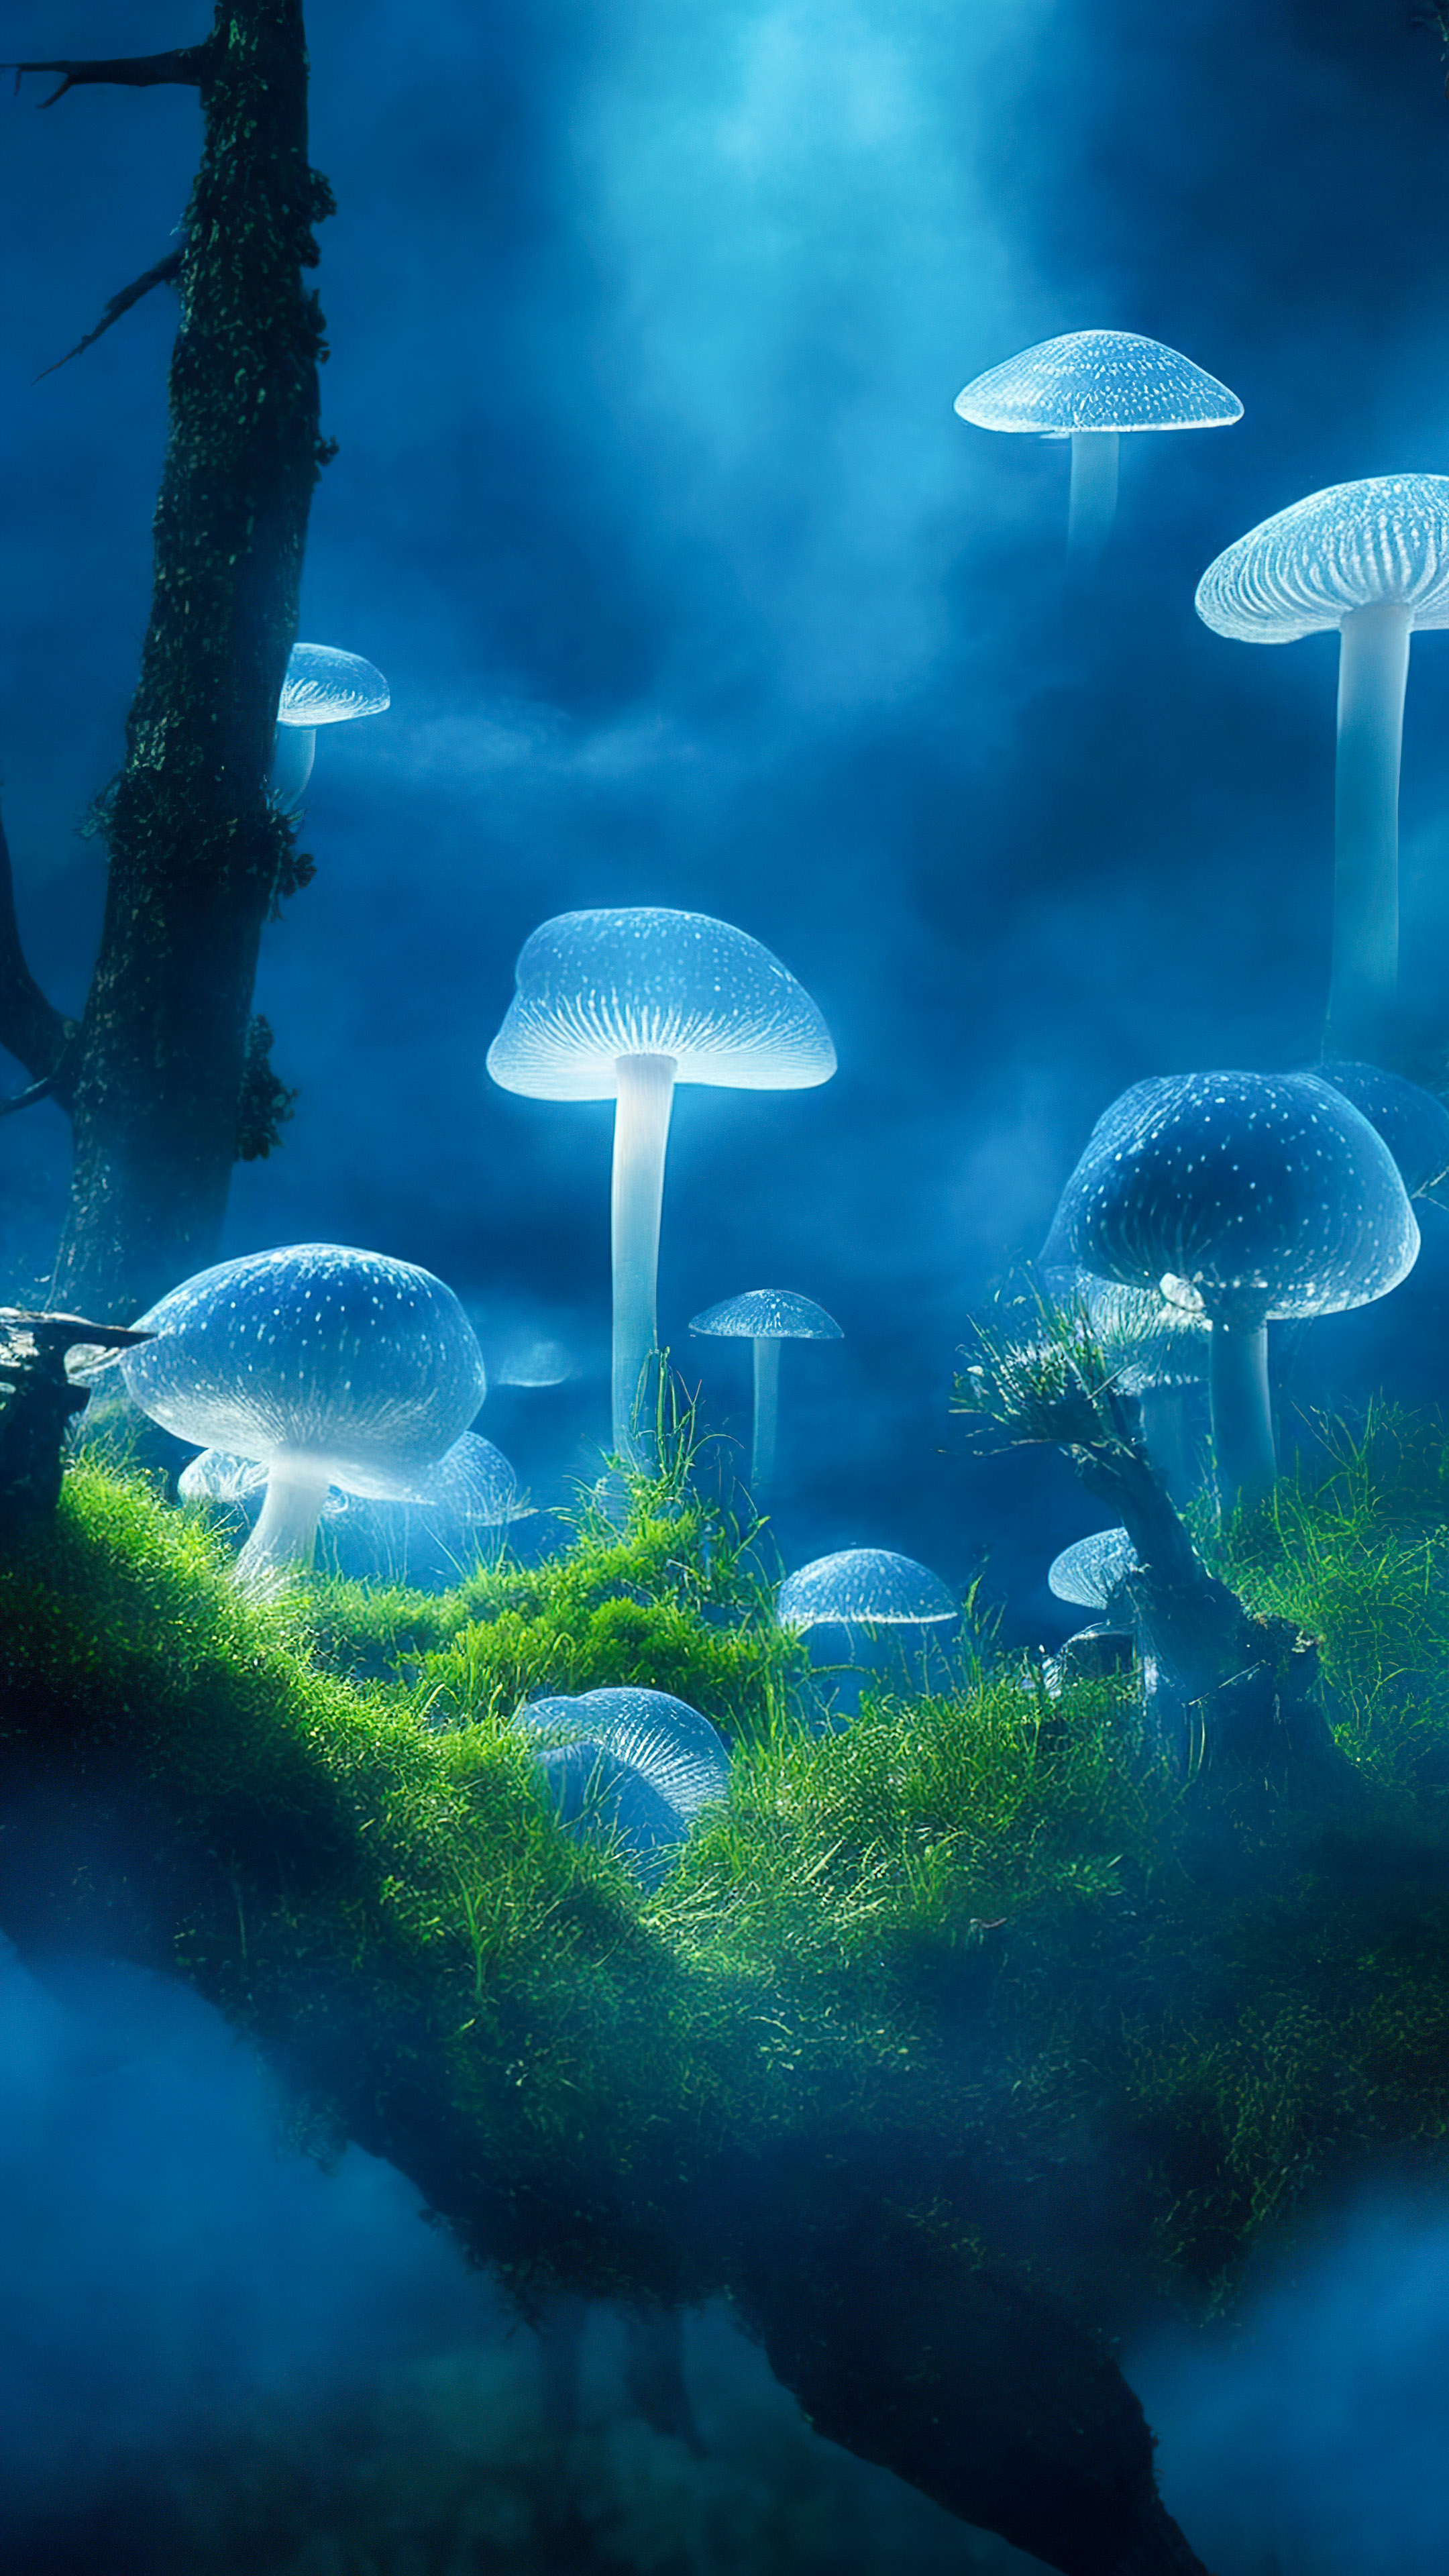 Get lost in the magic of our pretty backgrounds of nature, revealing a mystical glen with bioluminescent mushrooms, creating an enchanting, otherworldly scene.